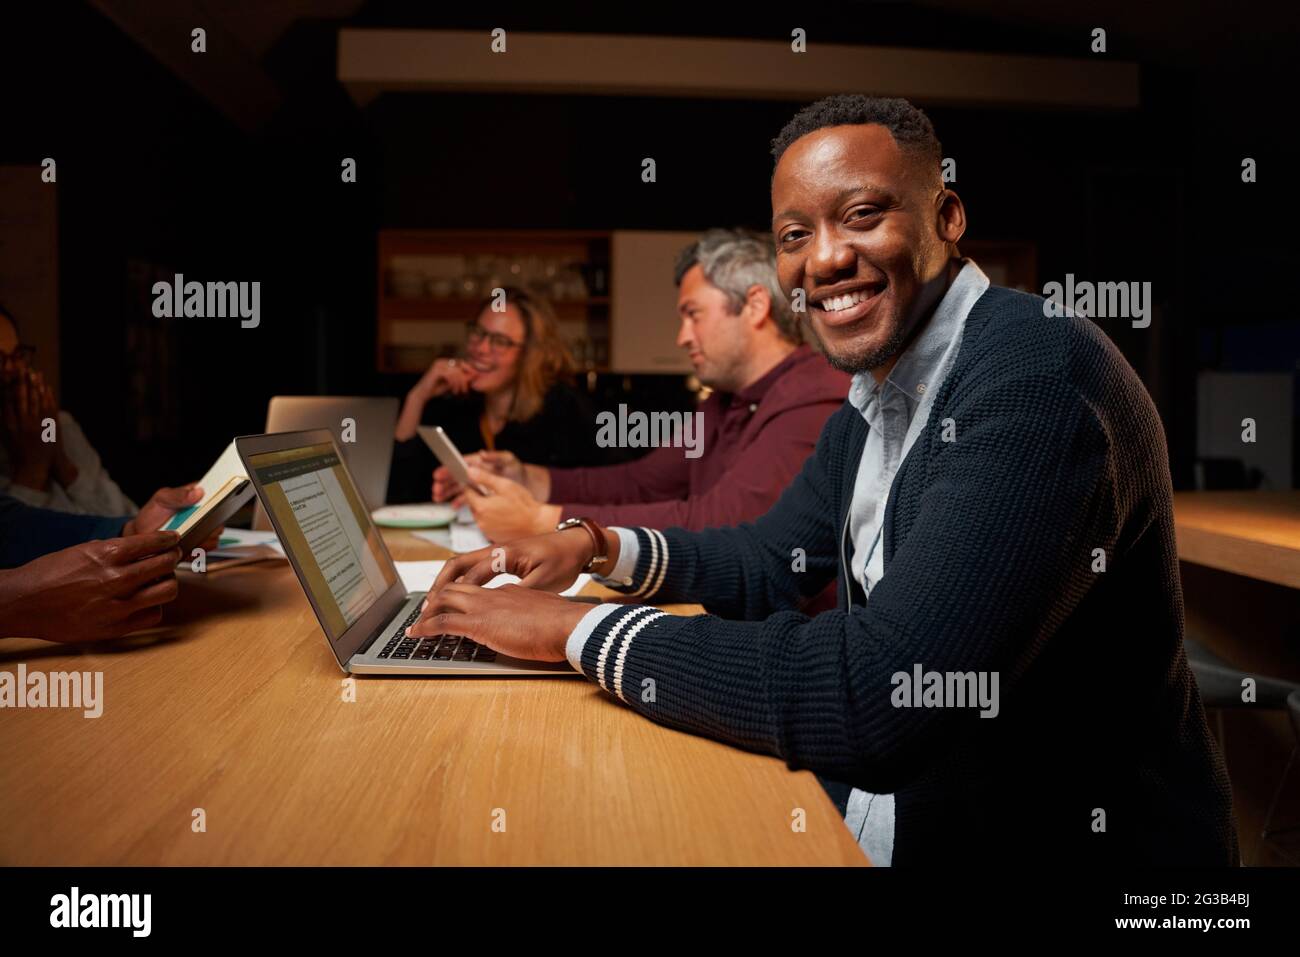 Portrait of smiling young african businessman using his laptop looking at camera while having meeting with his colleague Stock Photo